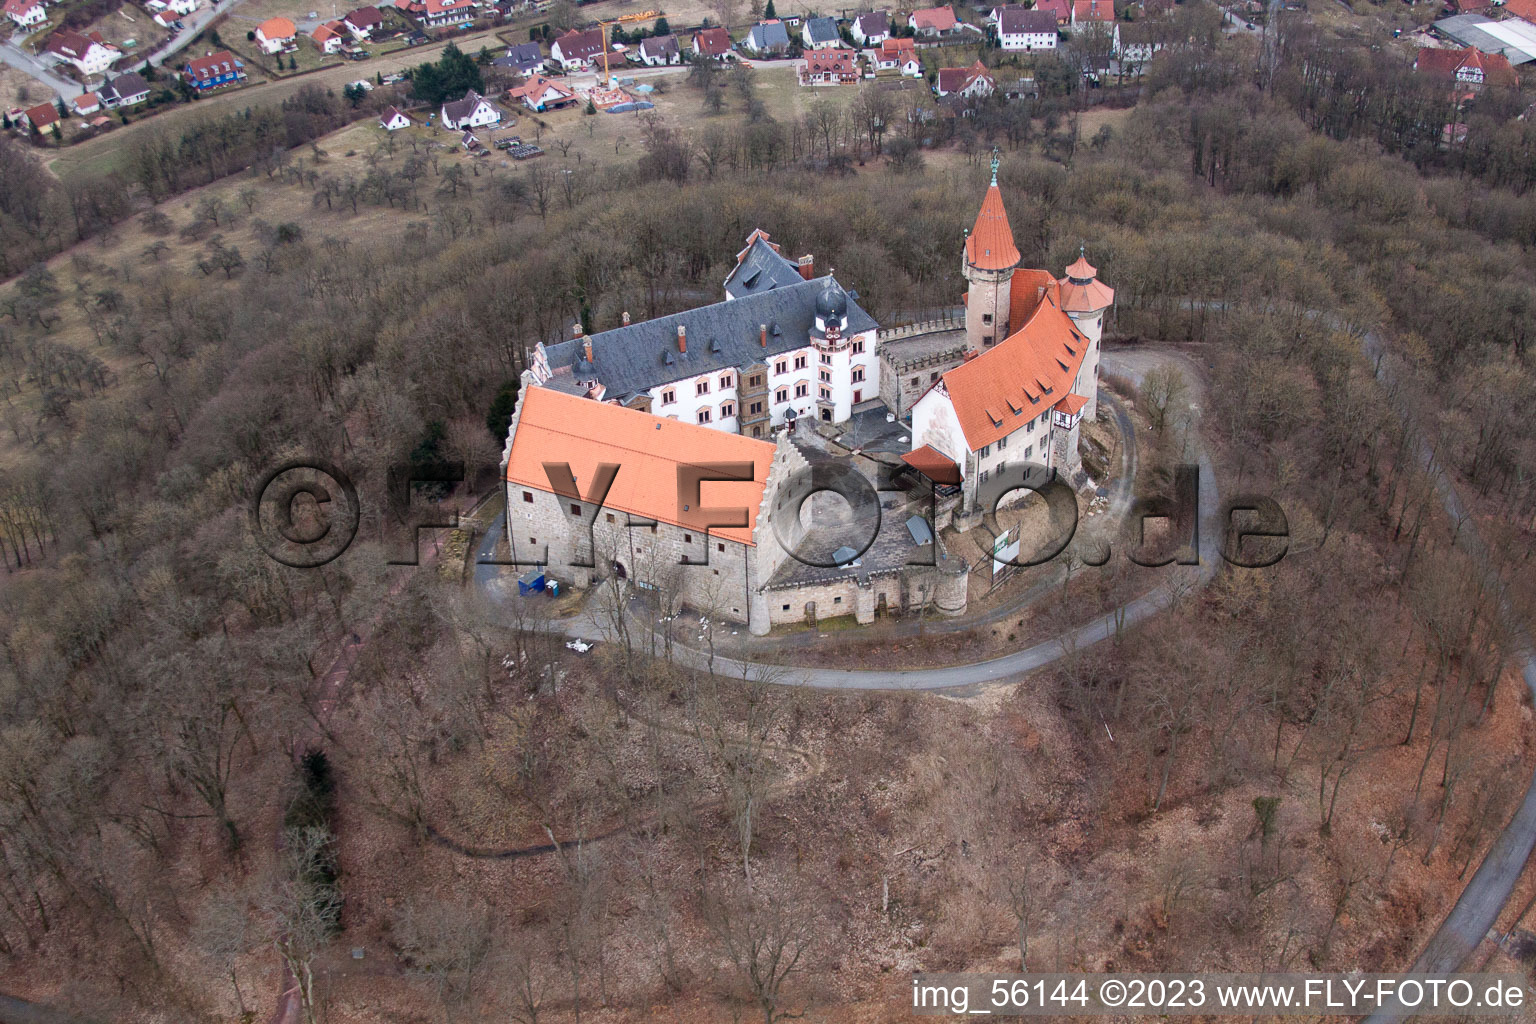 Aerial view of Fortress Heldburg in Bad Colberg-Heldburg in the state Thuringia, Germany